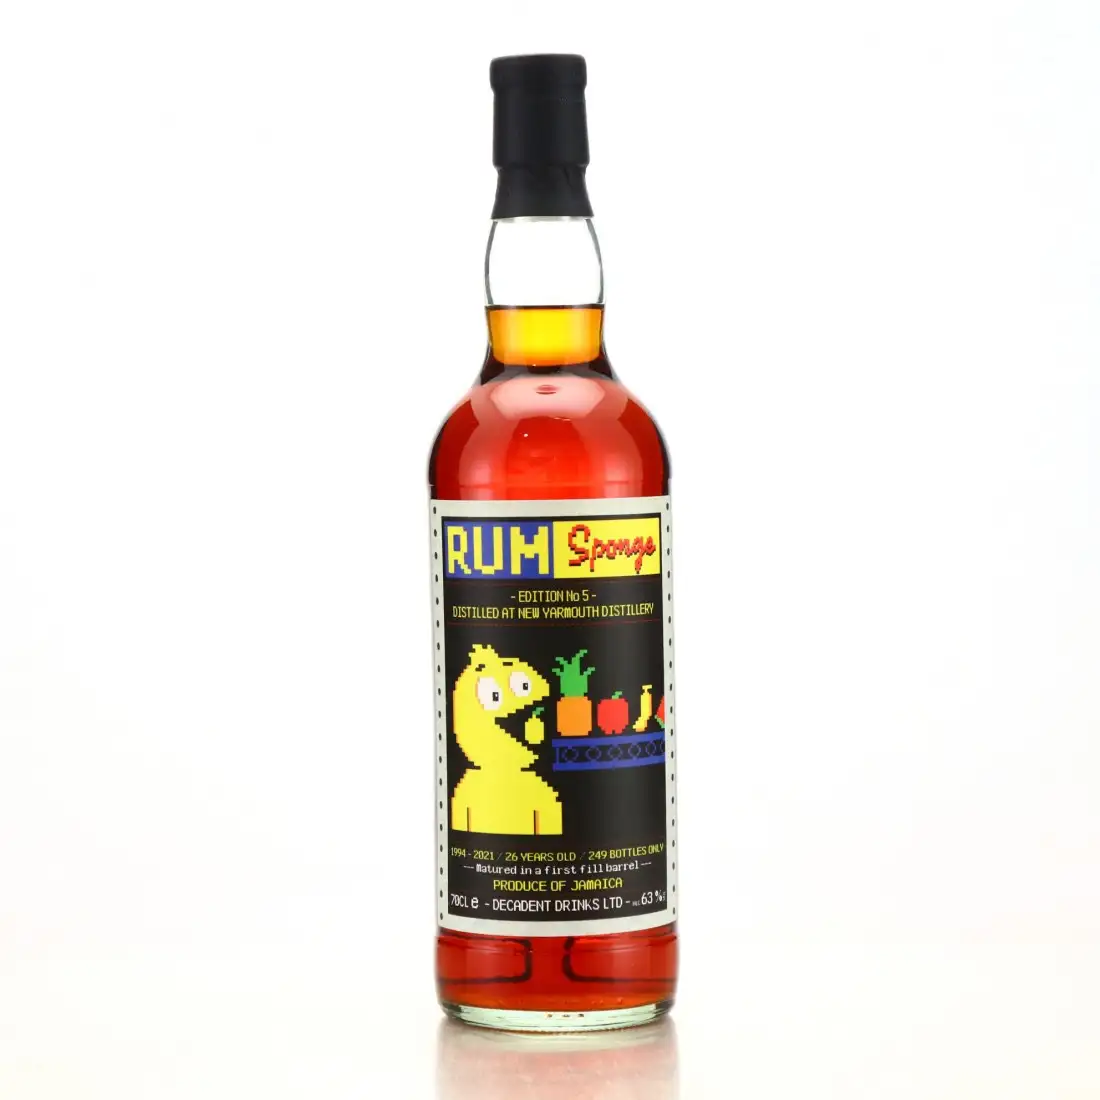 Image of the front of the bottle of the rum Rum Sponge No. 5